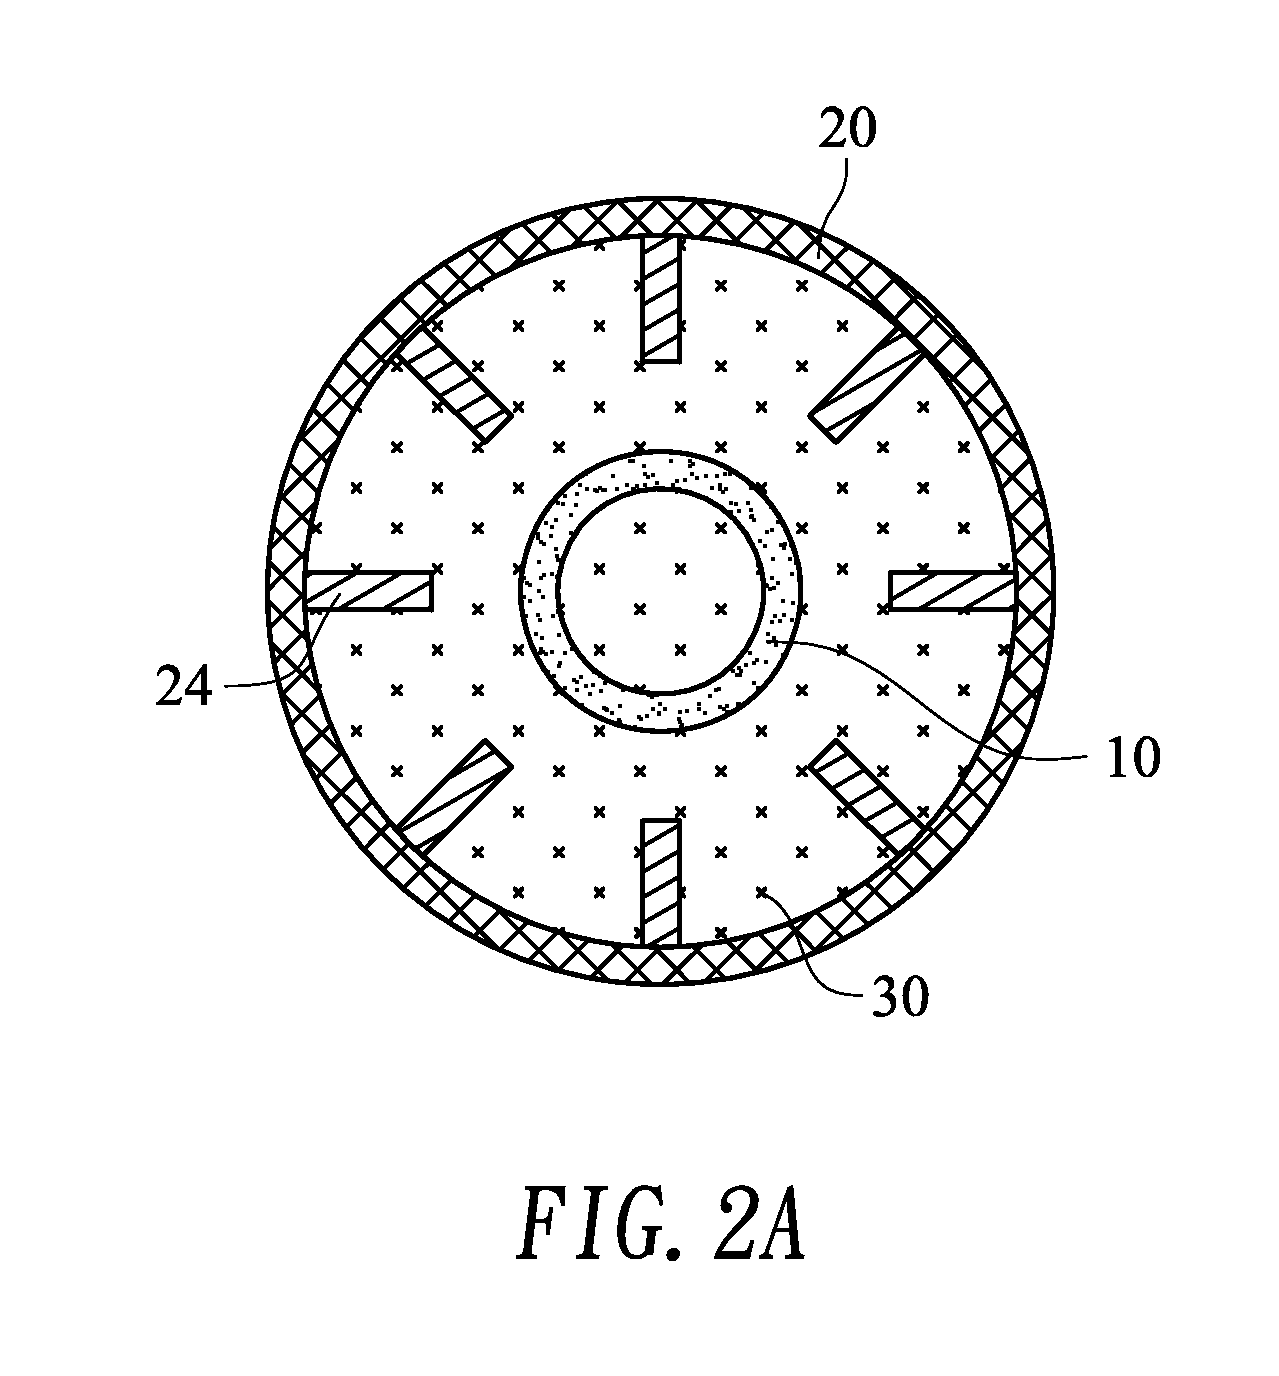 Cooling apparatus using solid-liquid phase change material